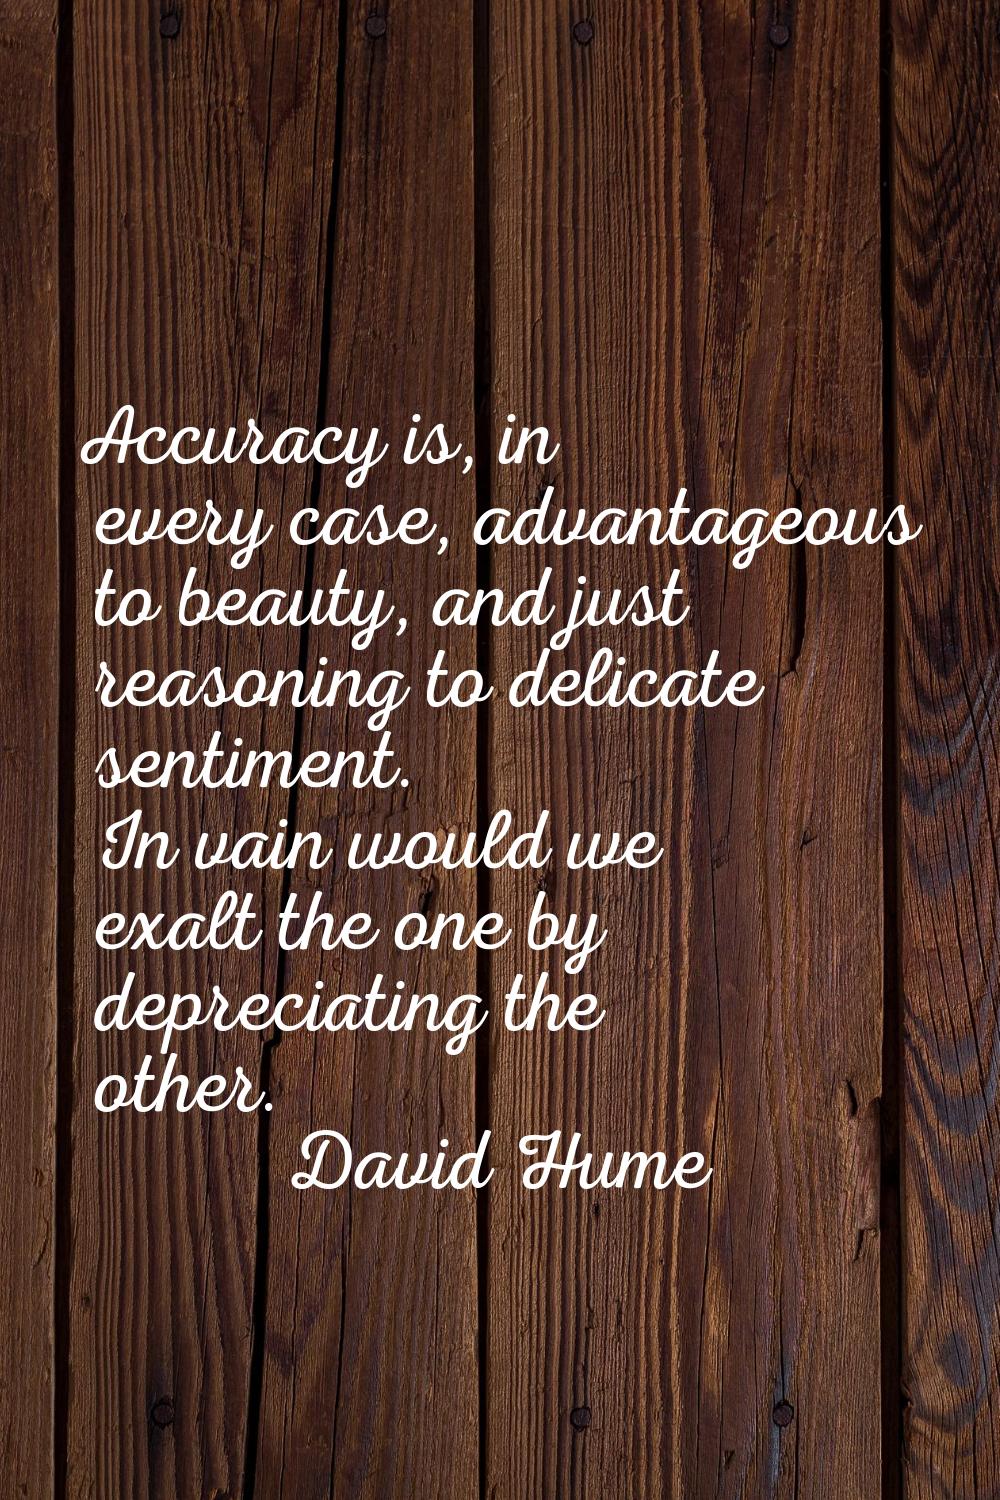 Accuracy is, in every case, advantageous to beauty, and just reasoning to delicate sentiment. In va